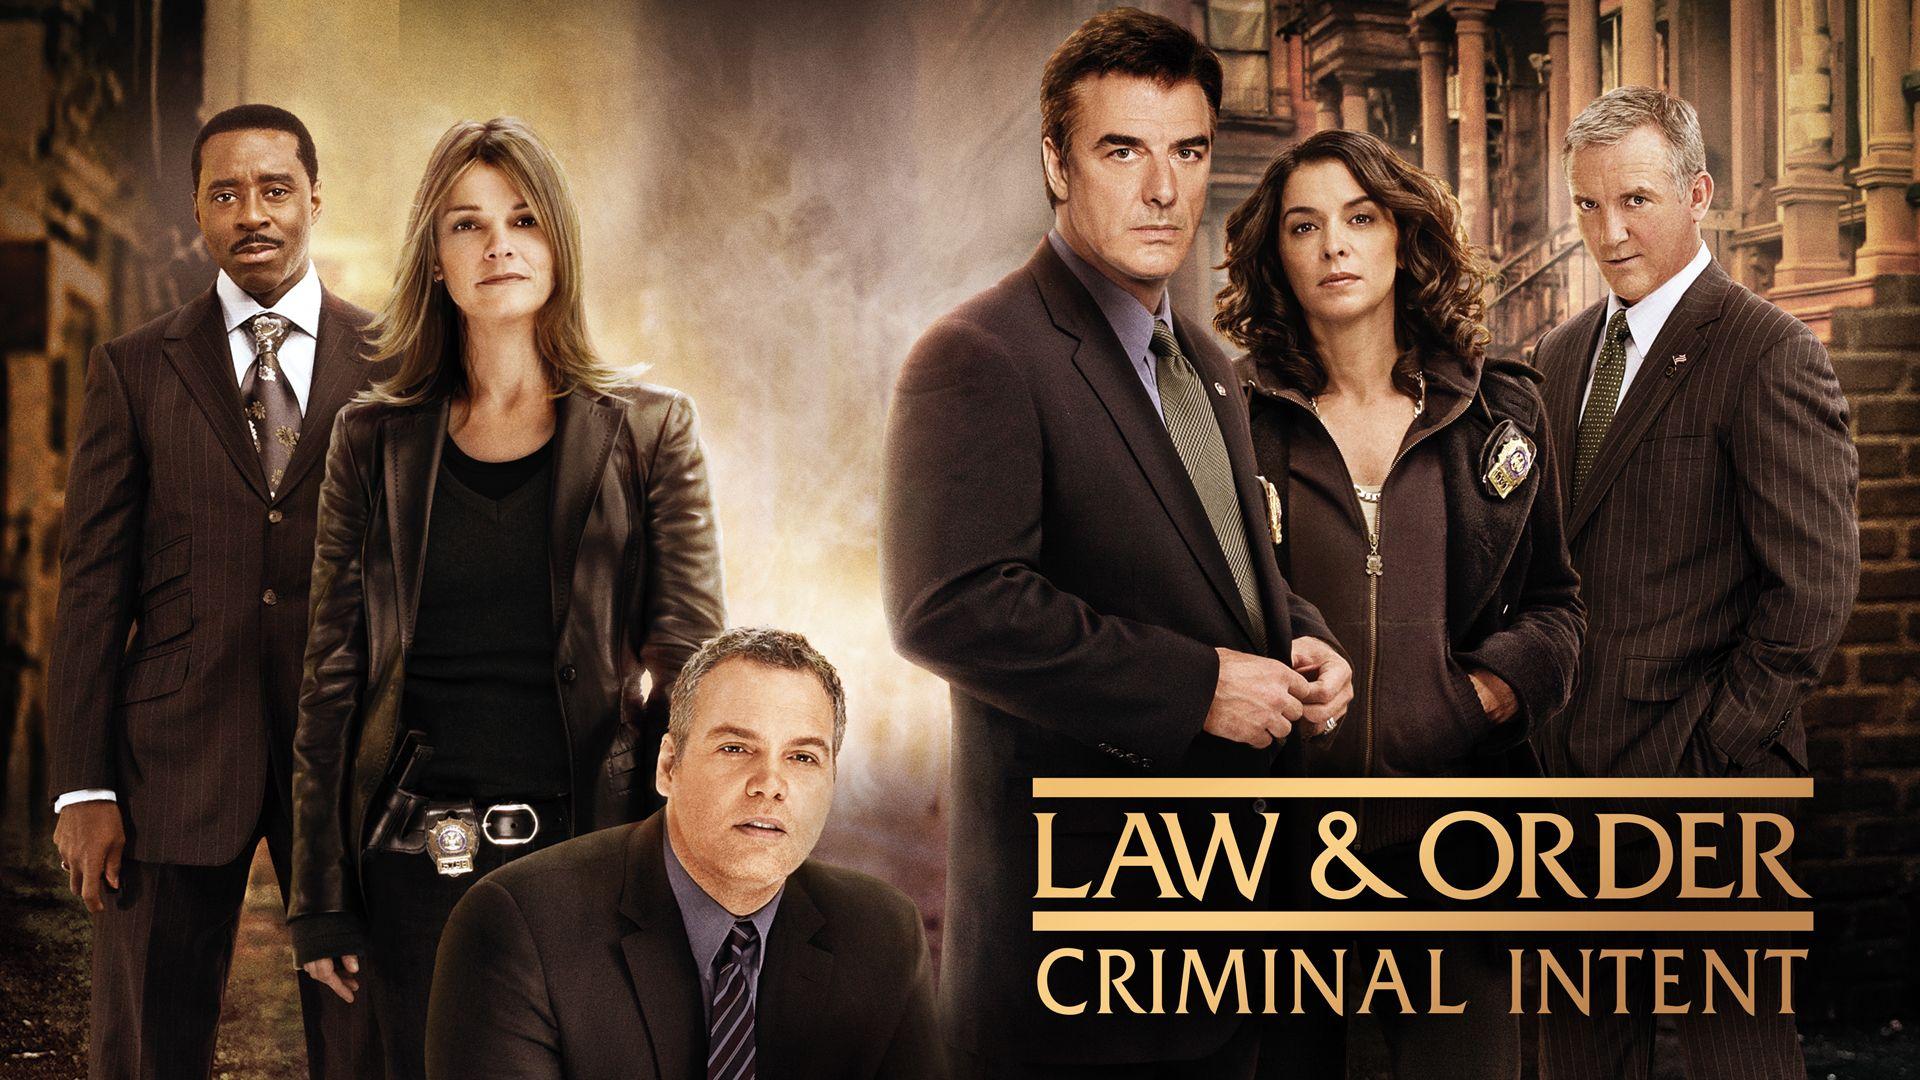 Law And Order Wallpapers Wallpaper Cave